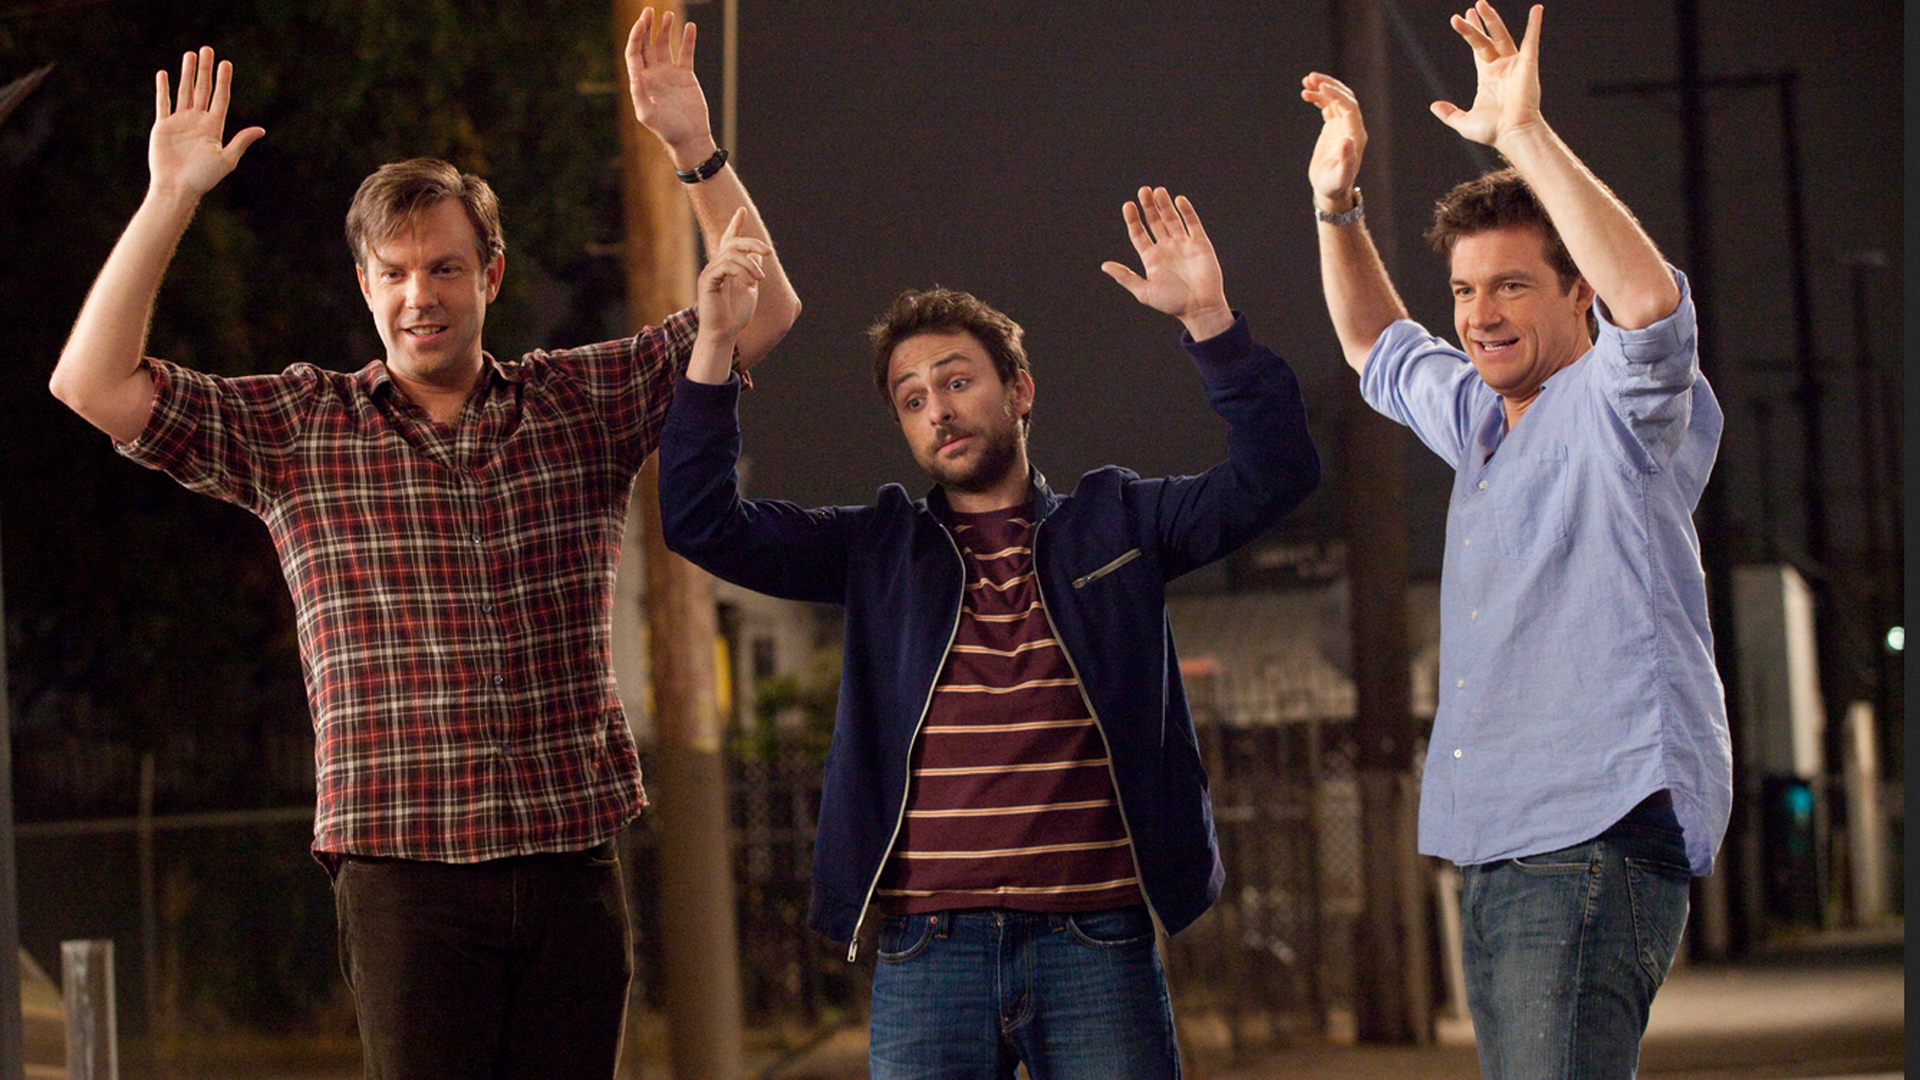 Horrible Bosses 2”: or, The Three Stooges Go Kidnapping